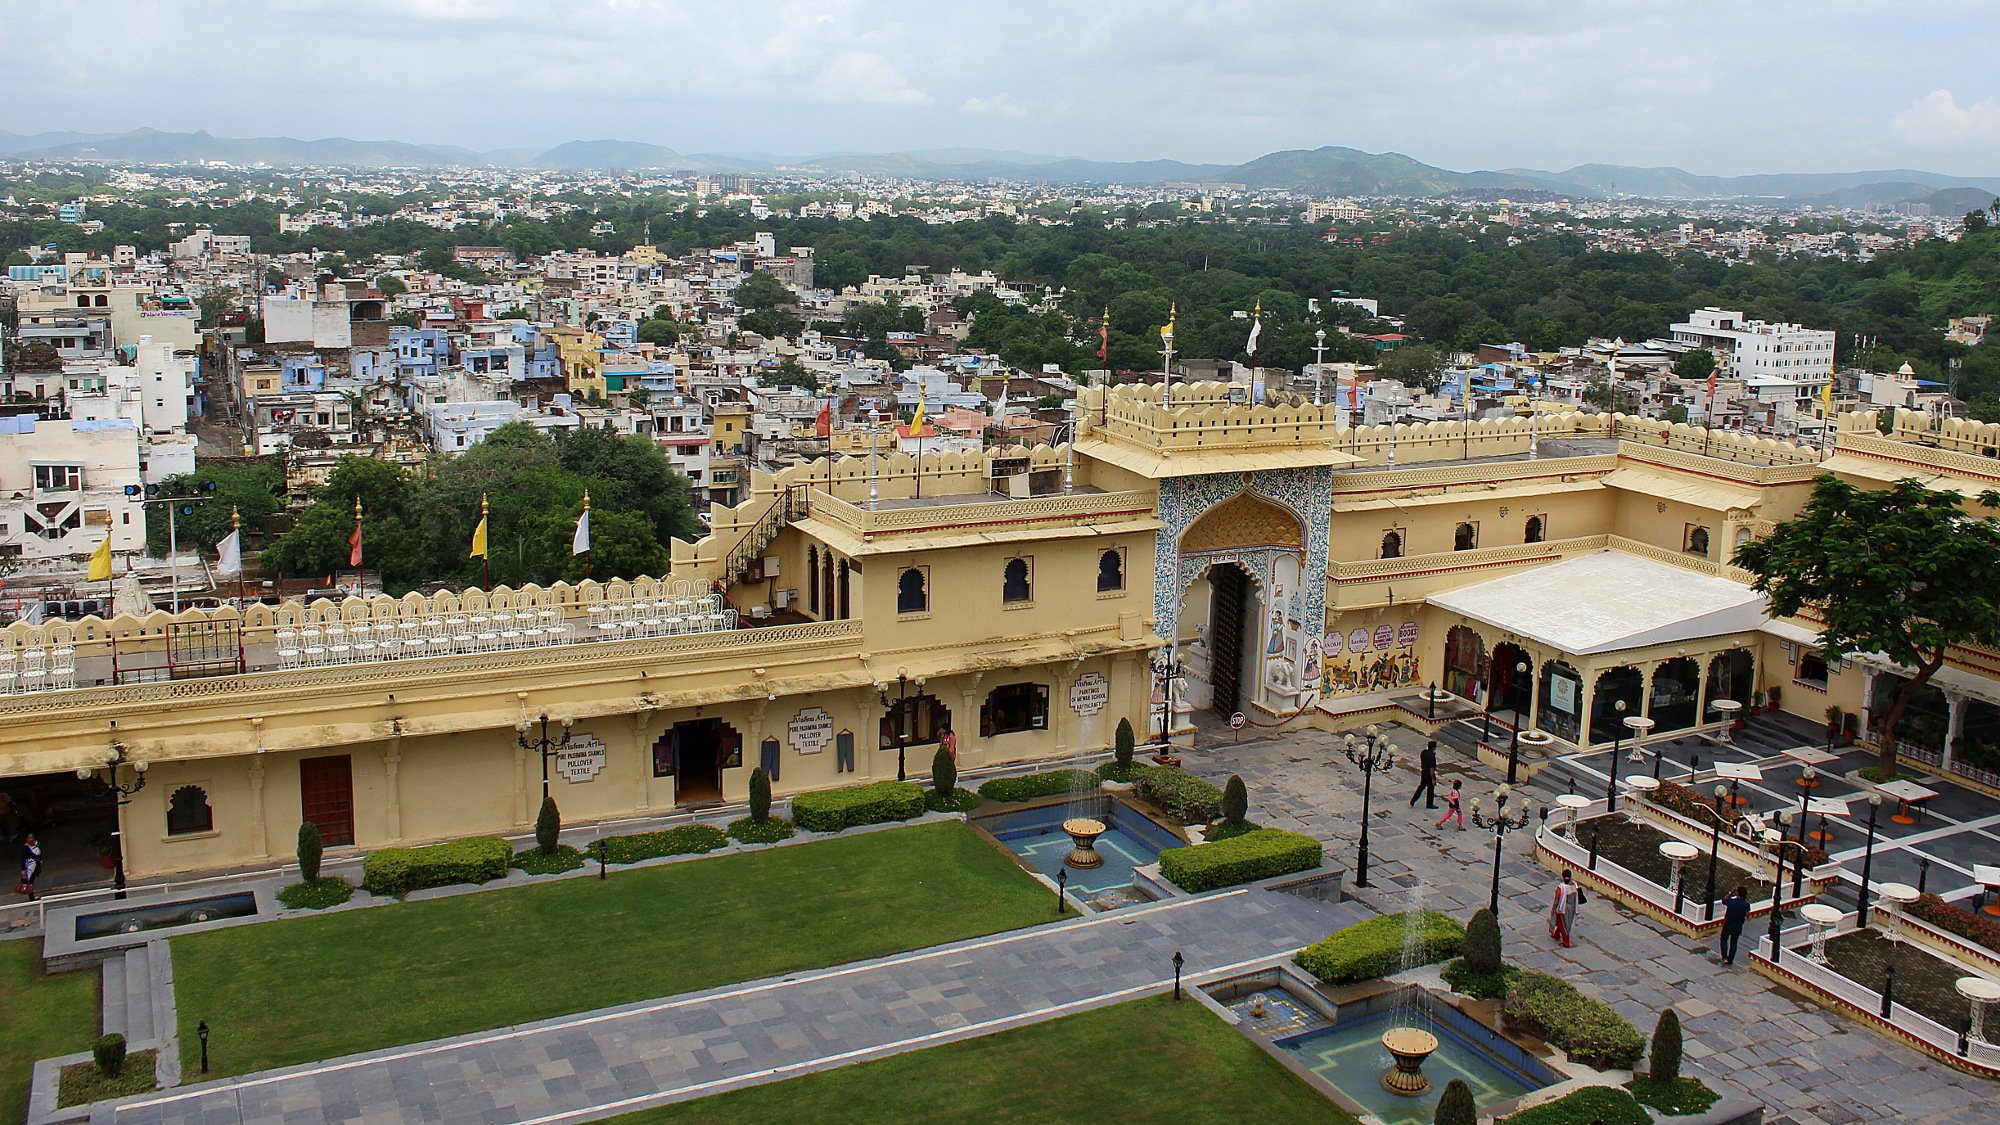 The courtyard of the City Palace of Udaipur from above with a high yellow wall between the yard and the city.